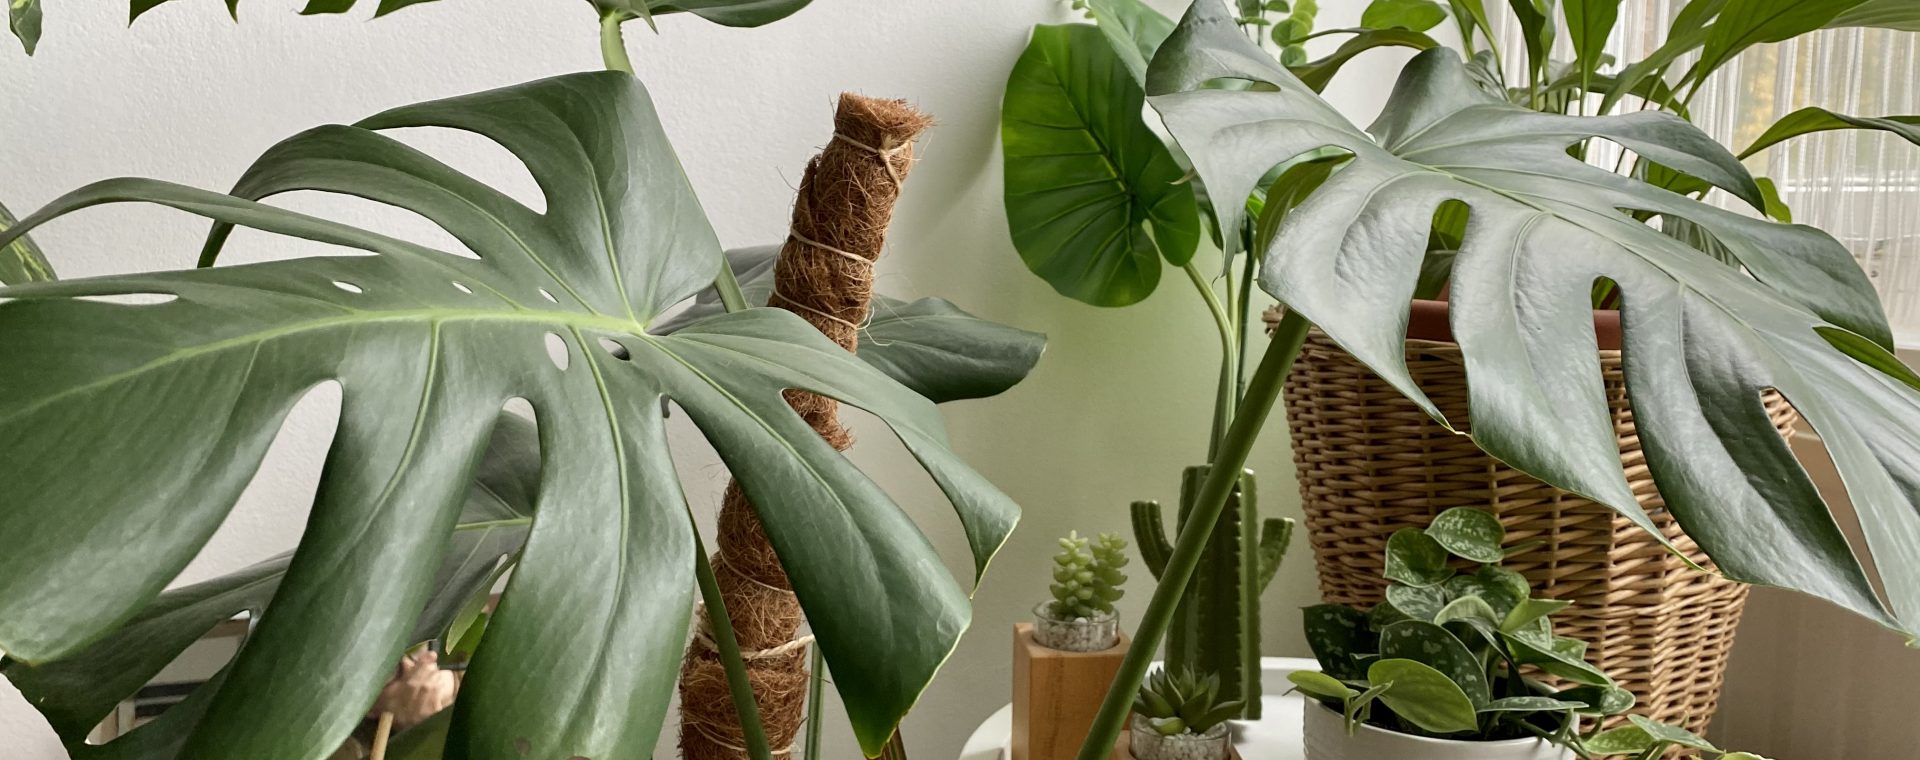 Indoor Plants For Beginners Part 2: Monstera Deliciosa (Swiss Cheese Plant)